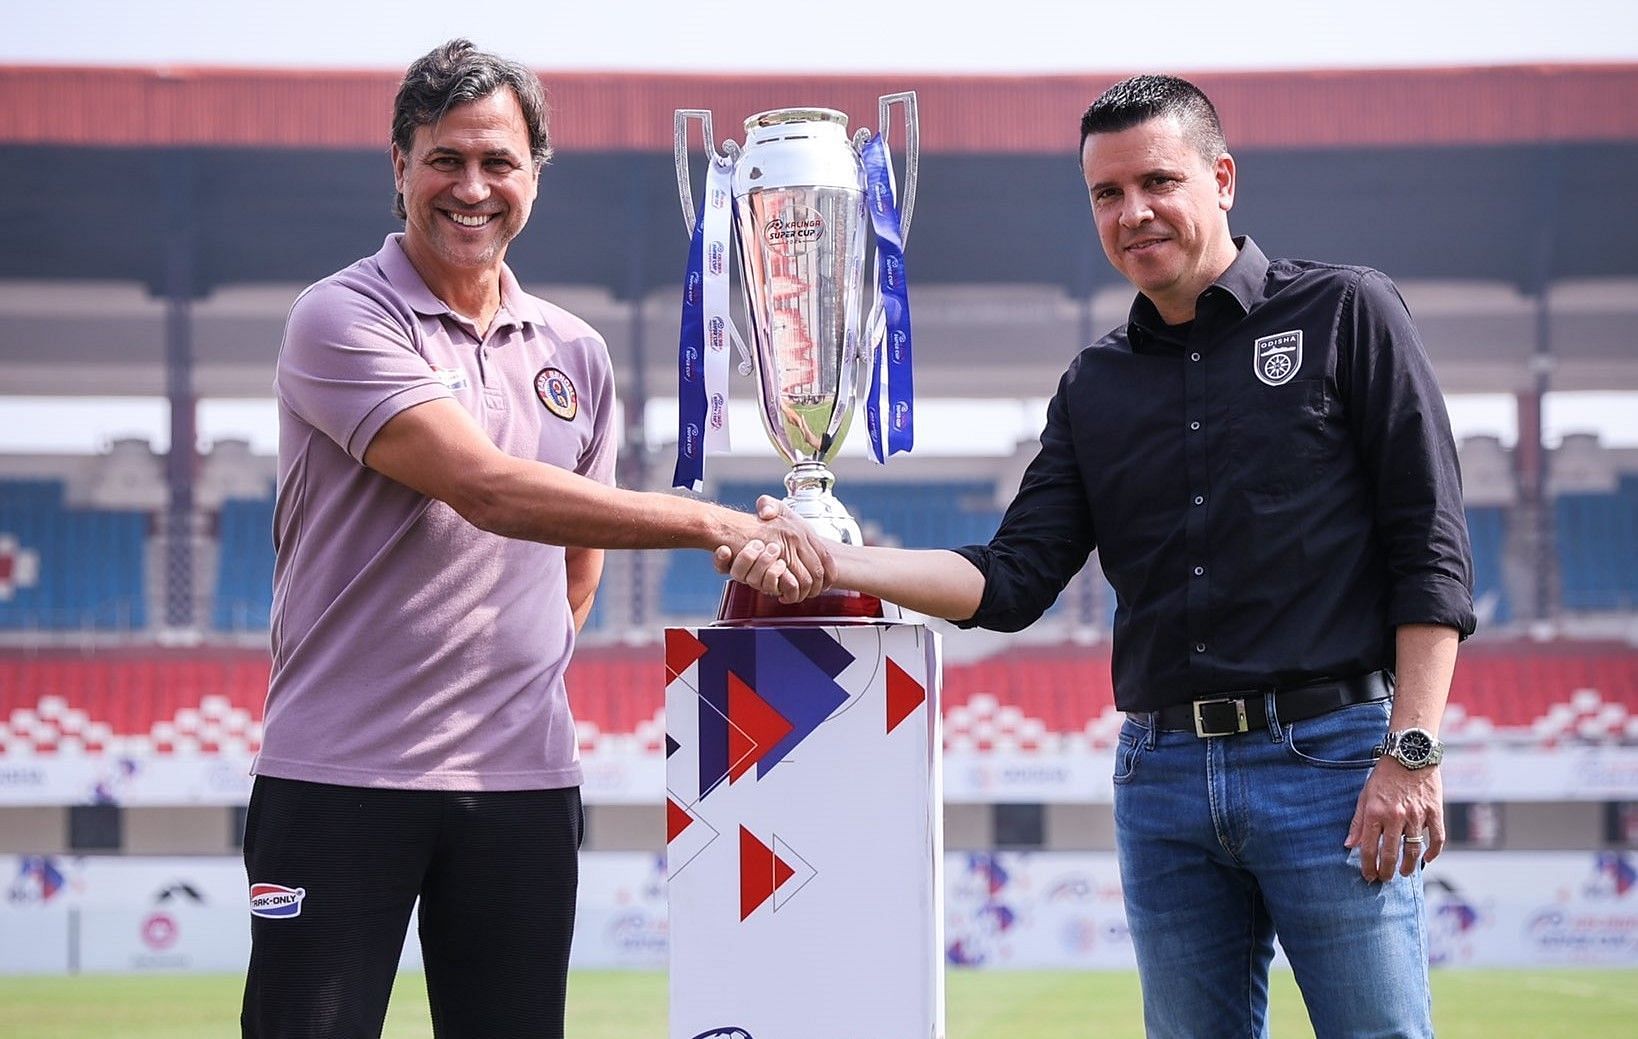 Odisha FC will be hoping to defend their Super Cup title against East Bengal.